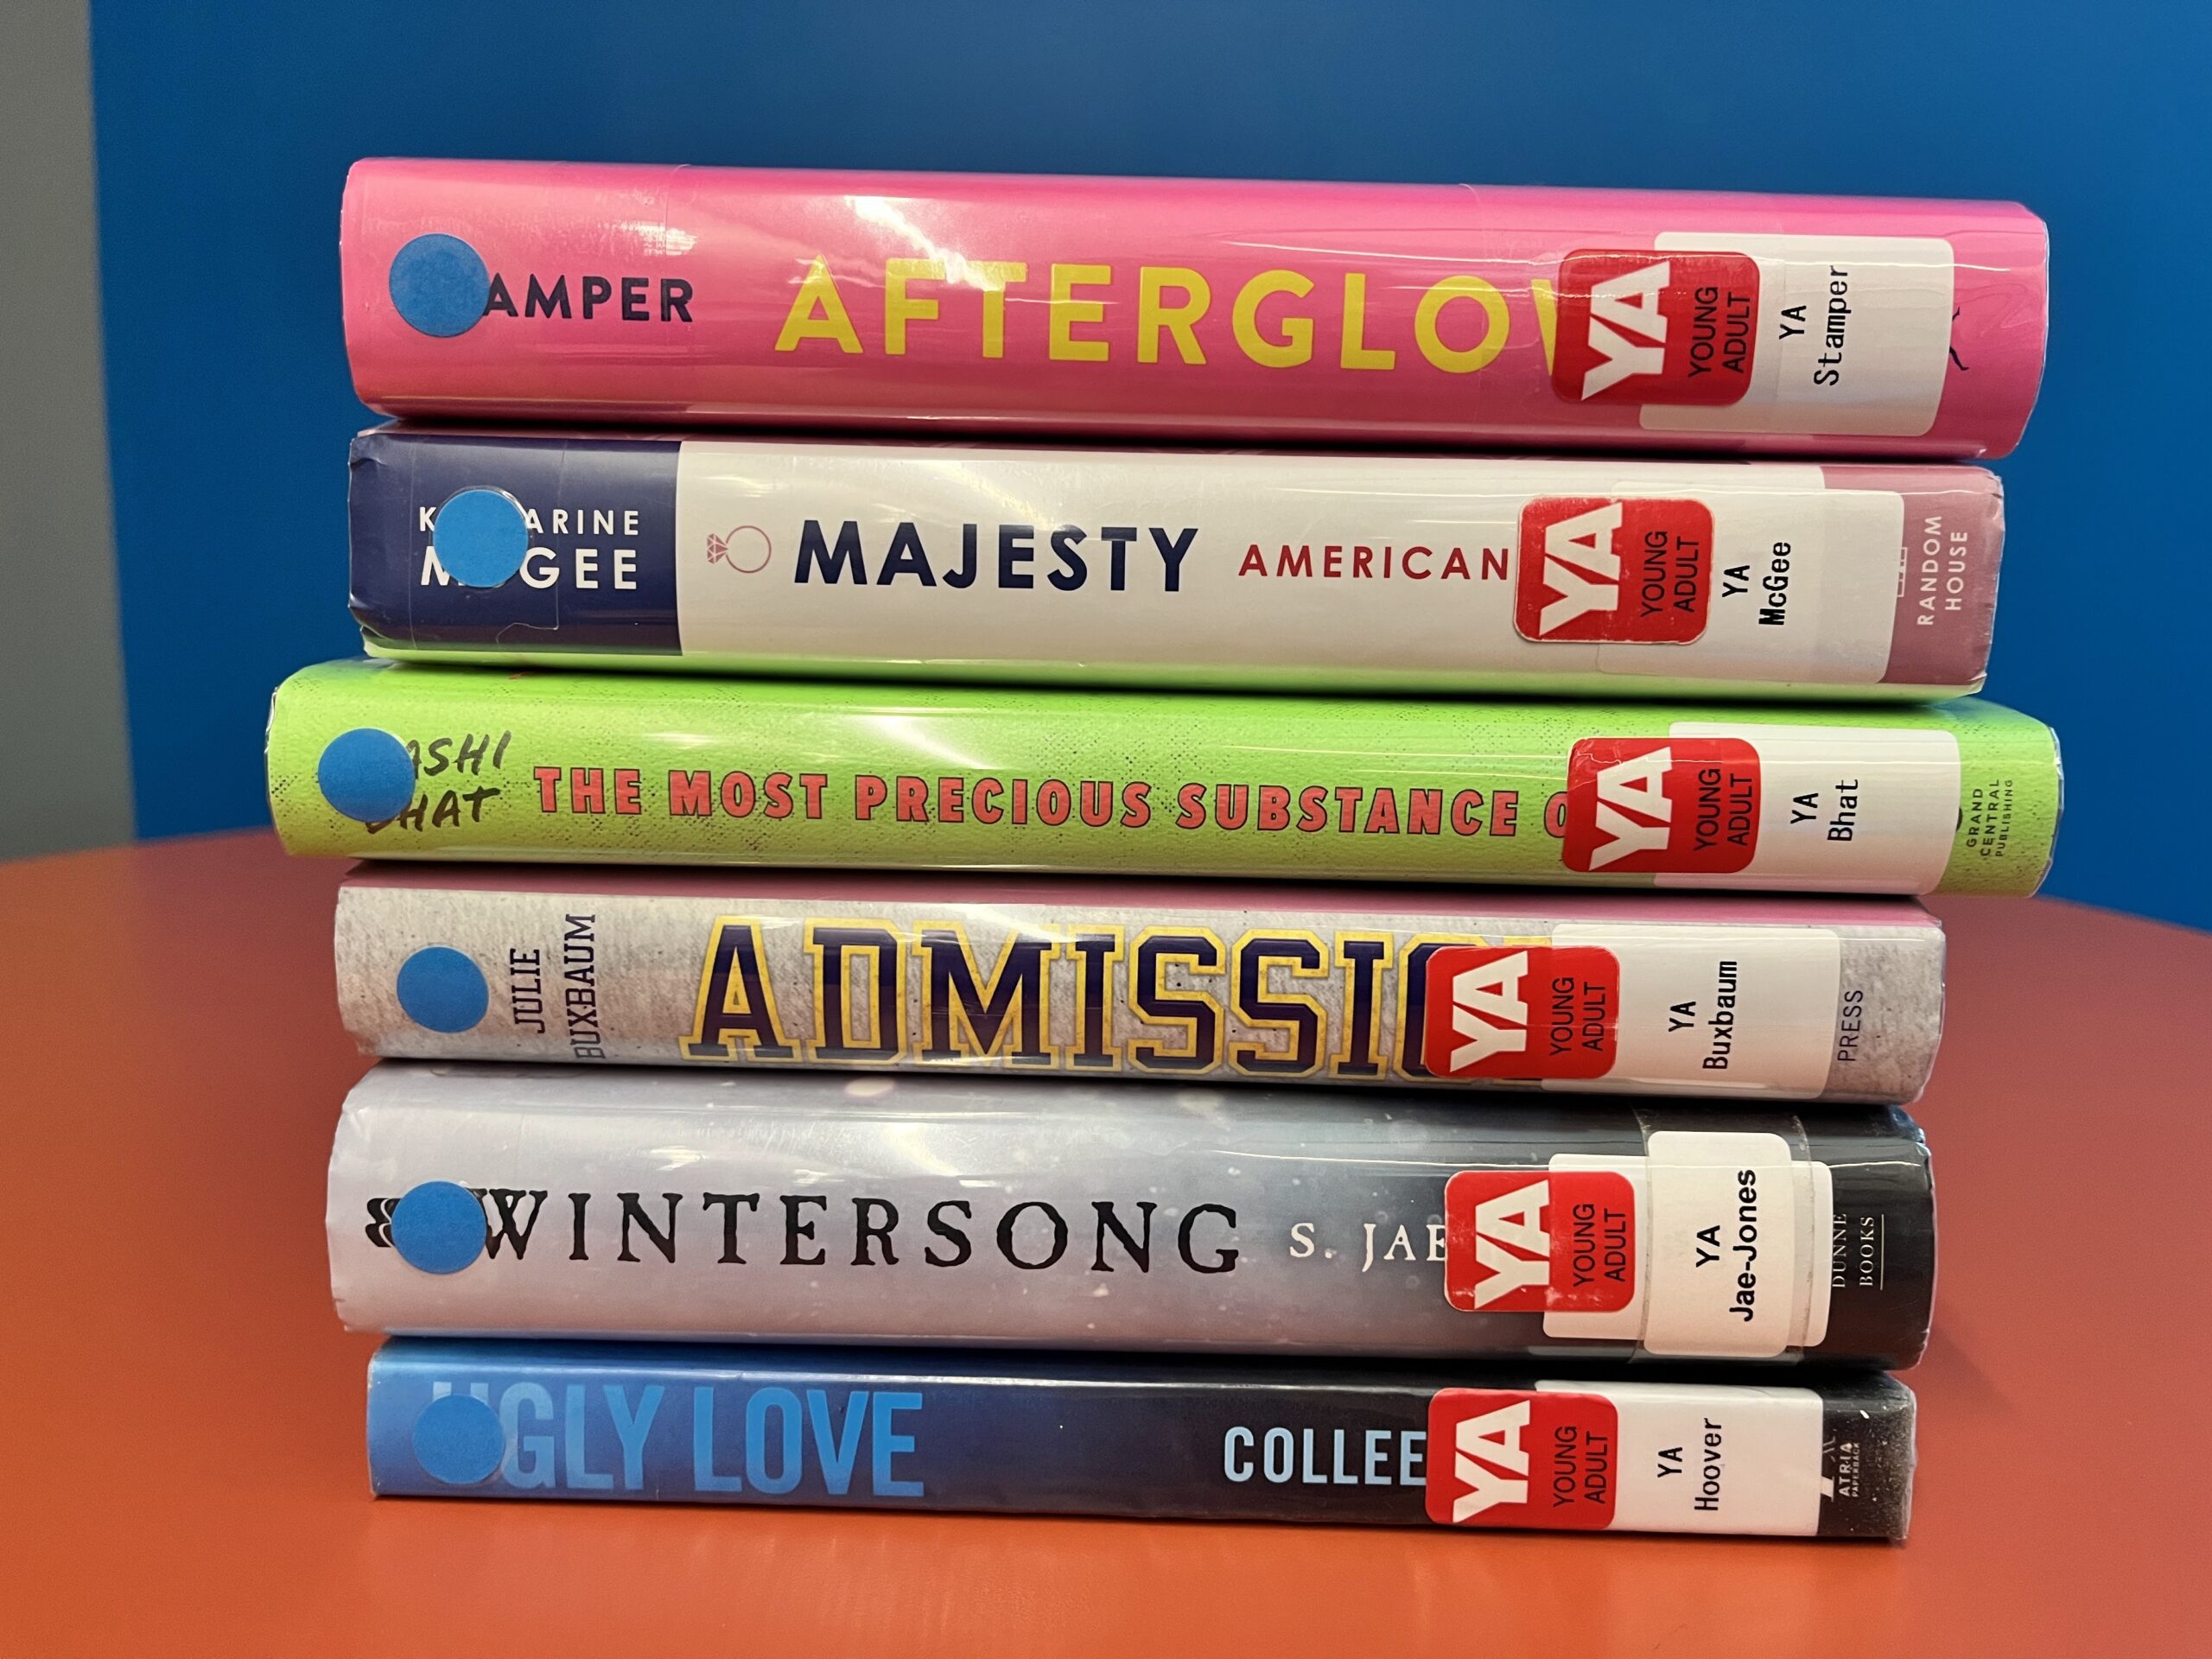 New Adult books with "blue dots" on spine